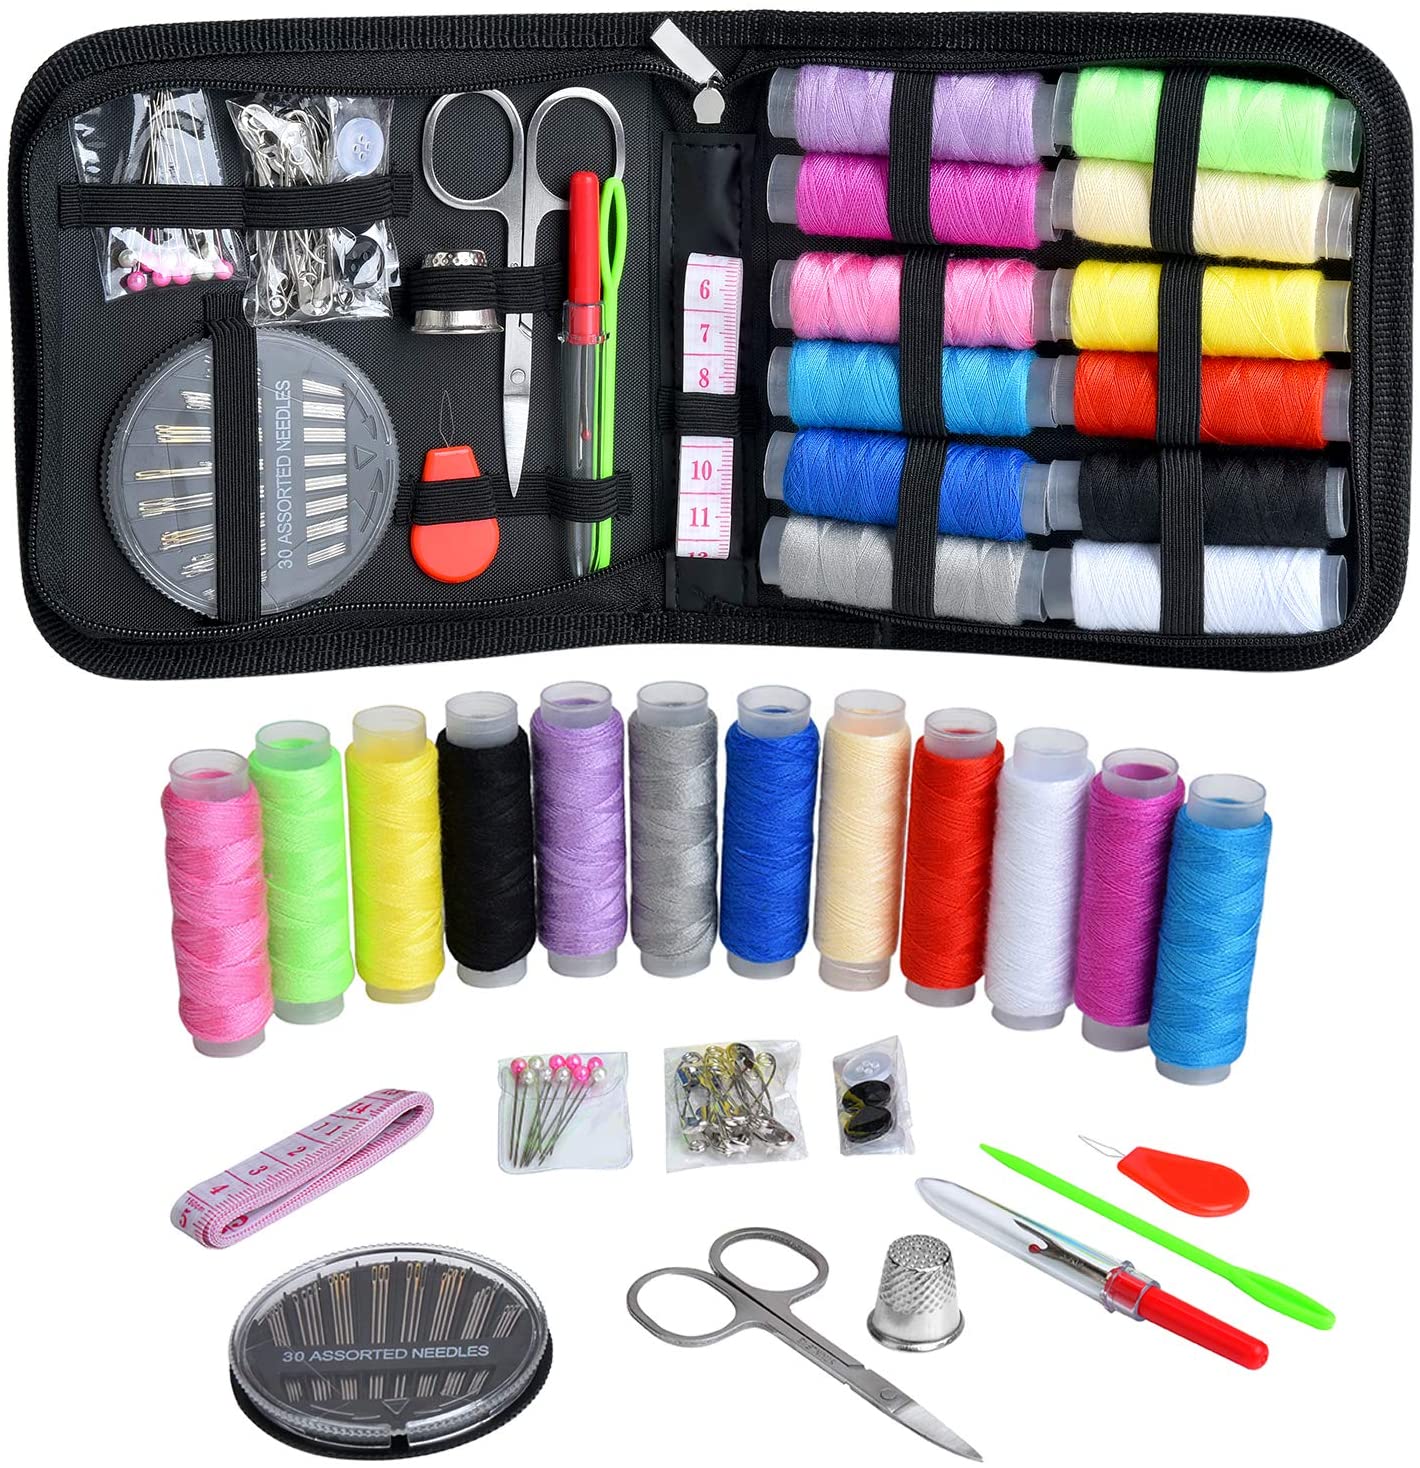 Marcoon Portable Sewing Project Kit, 74-Piece